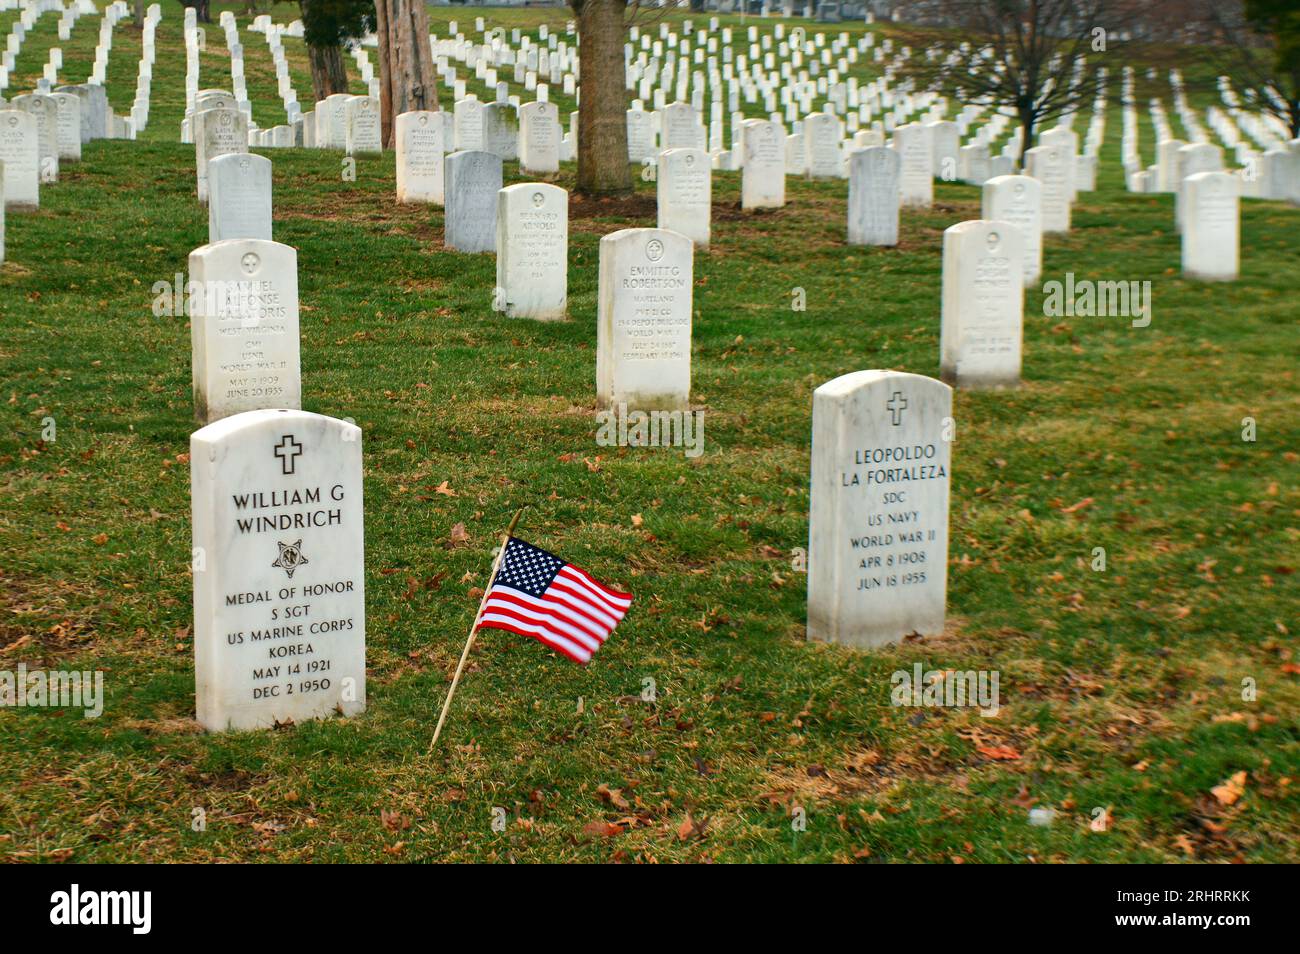 A small American flag waves amongst the numerous graves of deceased veterans at Arlington National Cemetery, near Washington DC Stock Photo